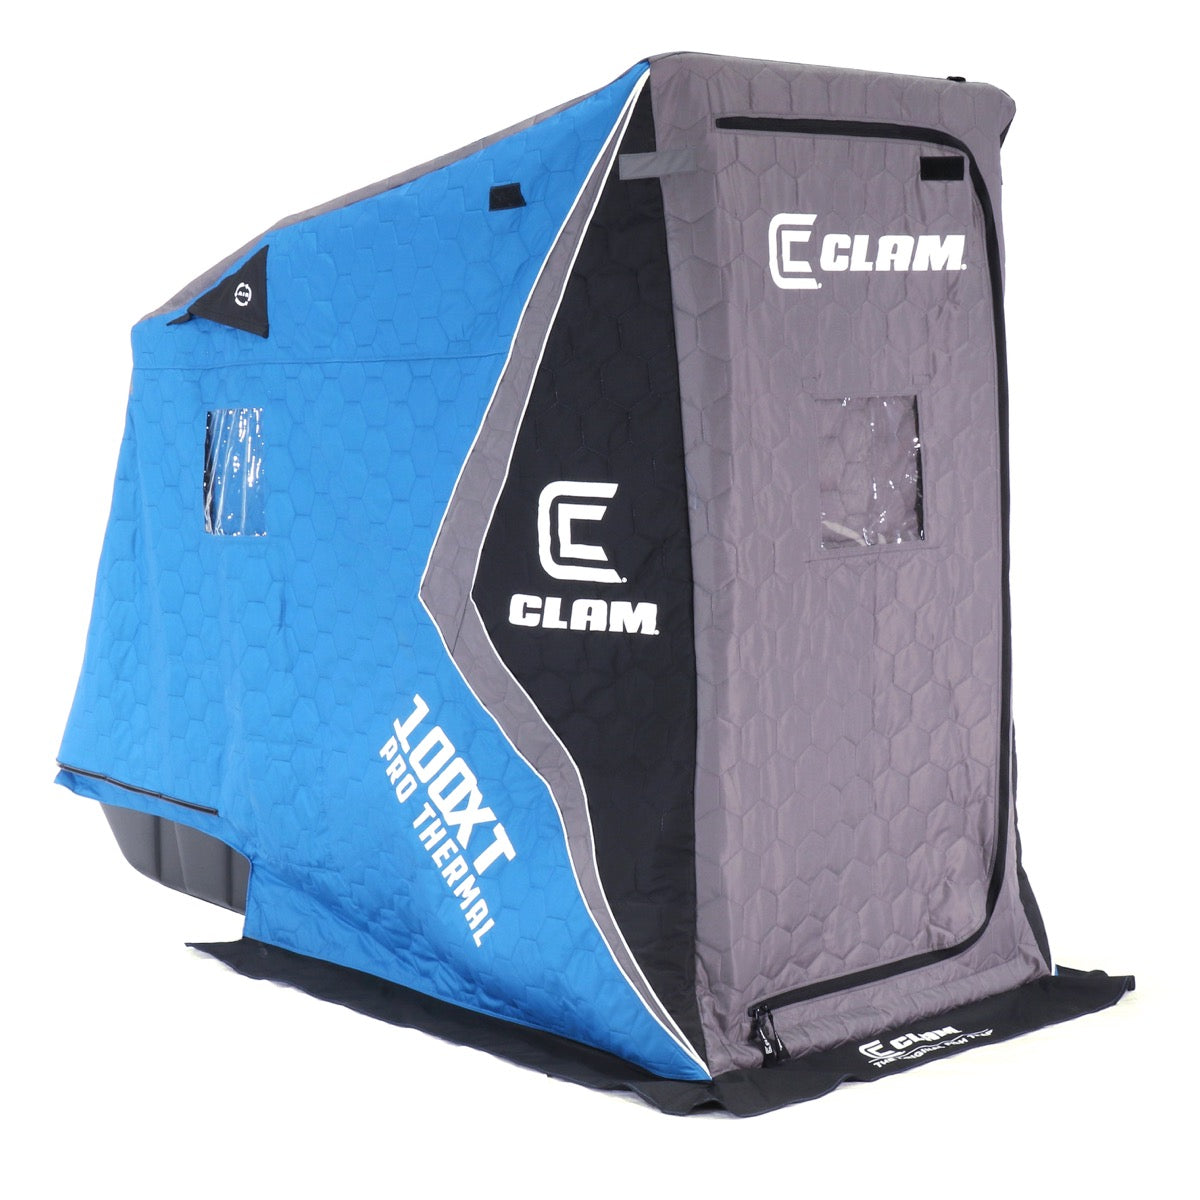 CLAM X100 XT Thermal Shelter